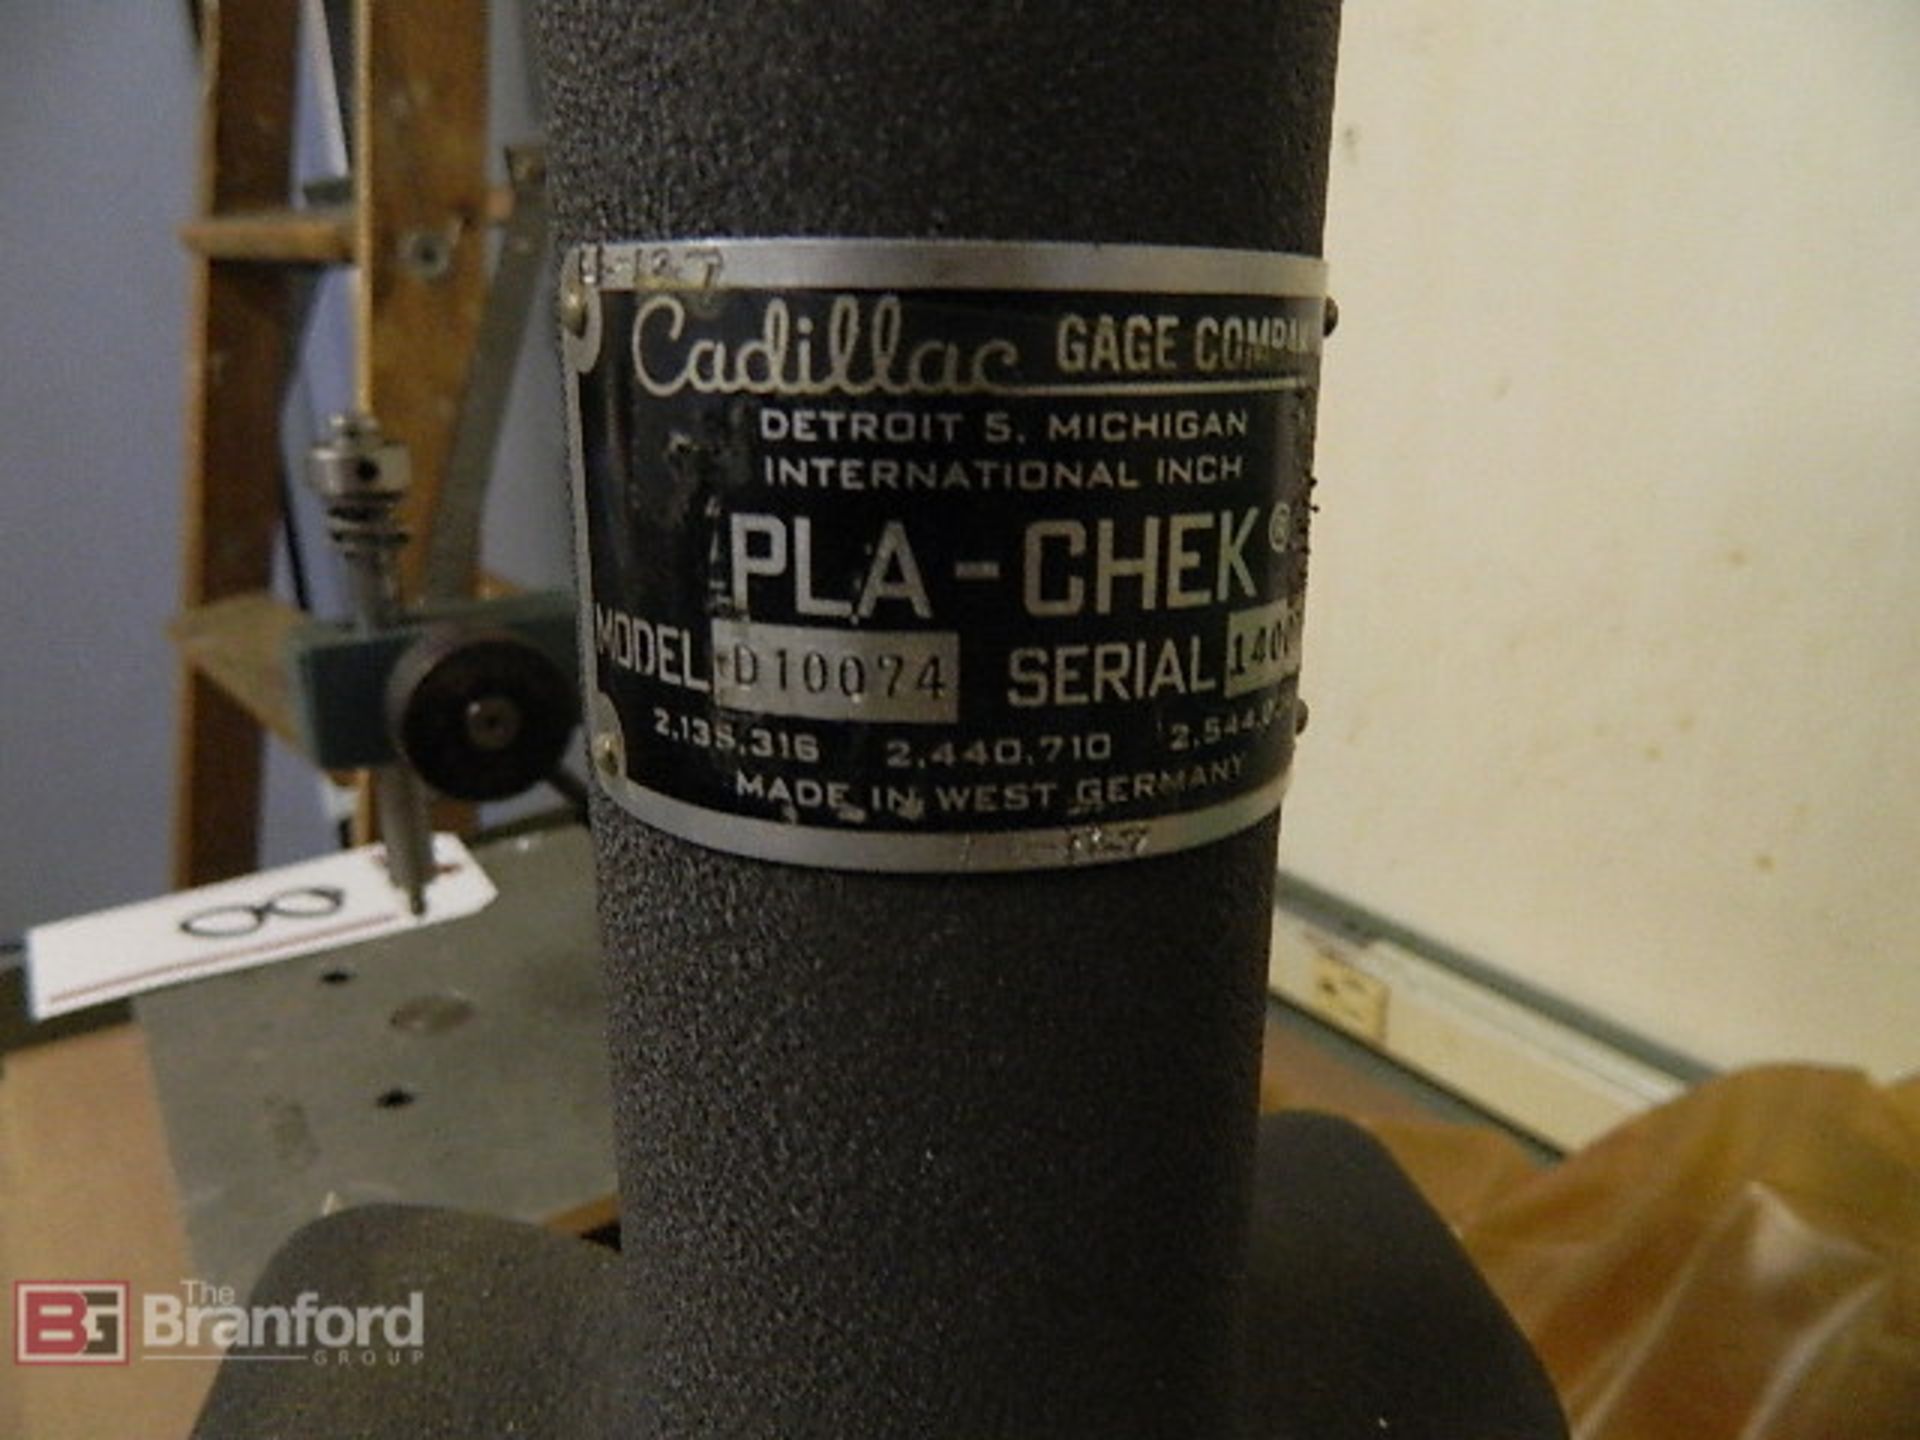 Cadillac Gage Co. Pla-Chek, m/n D10074 - Image 2 of 2